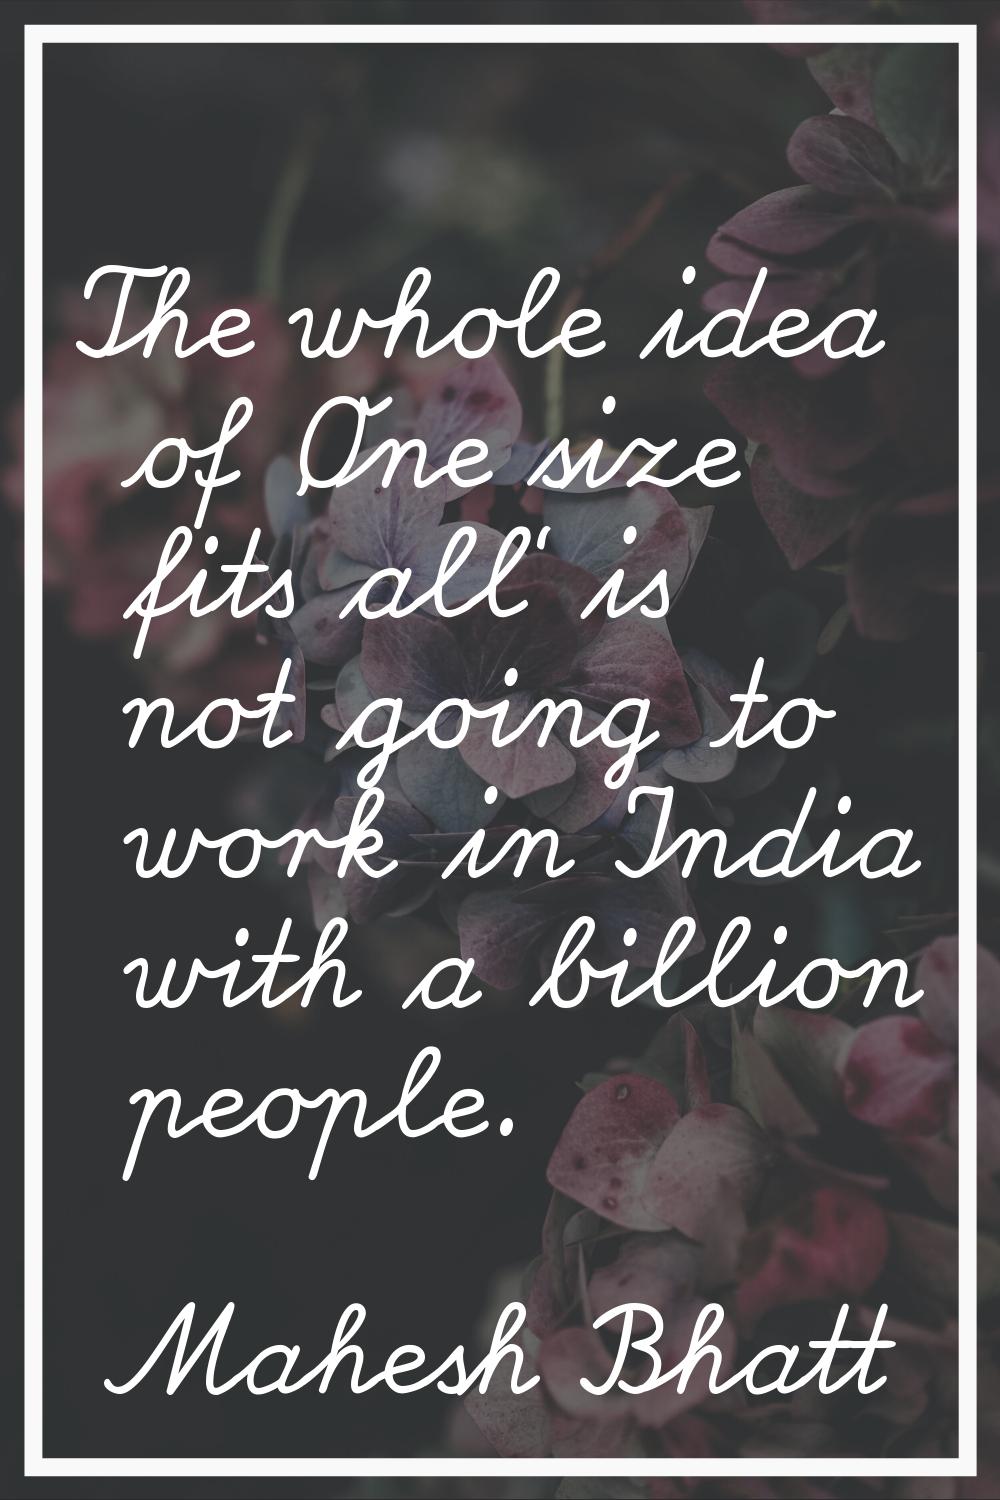 The whole idea of 'One size fits all' is not going to work in India with a billion people.